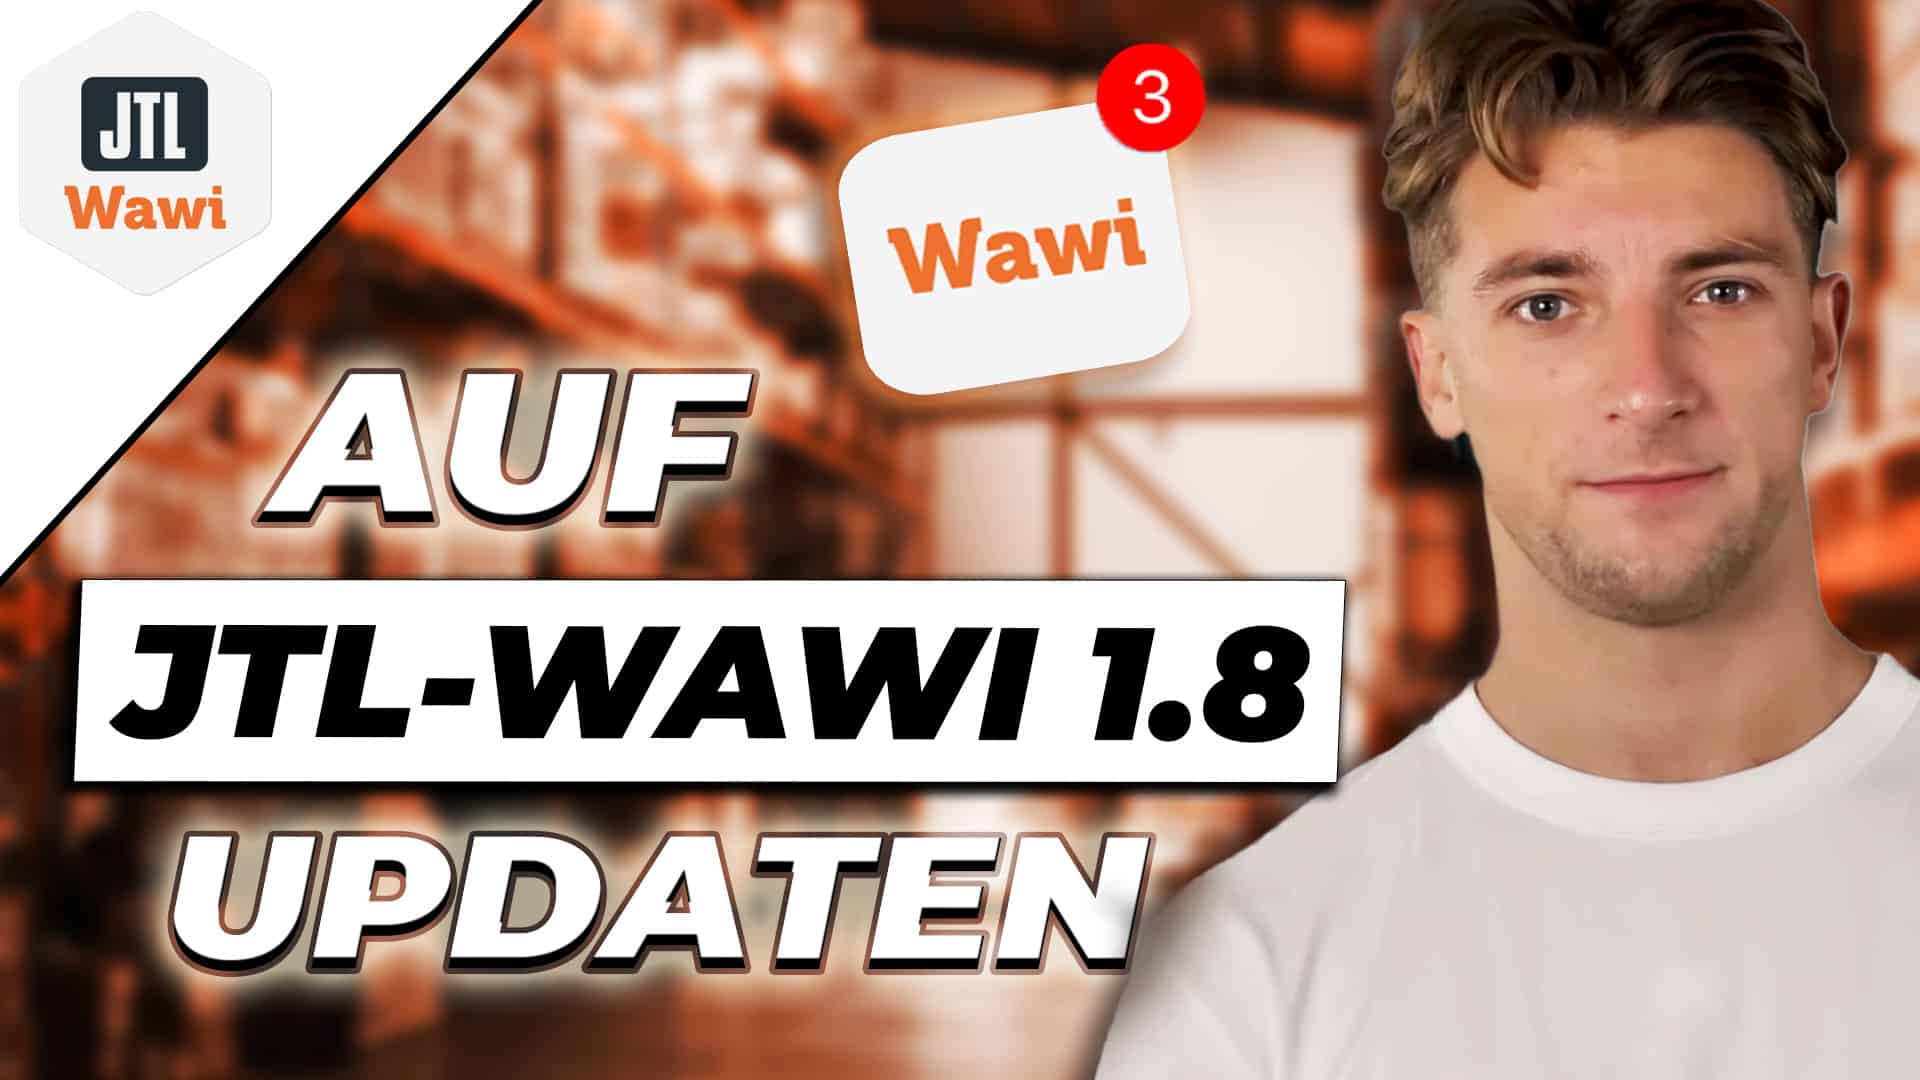 Update to JTL-Wawi 1.8 – We show how it works